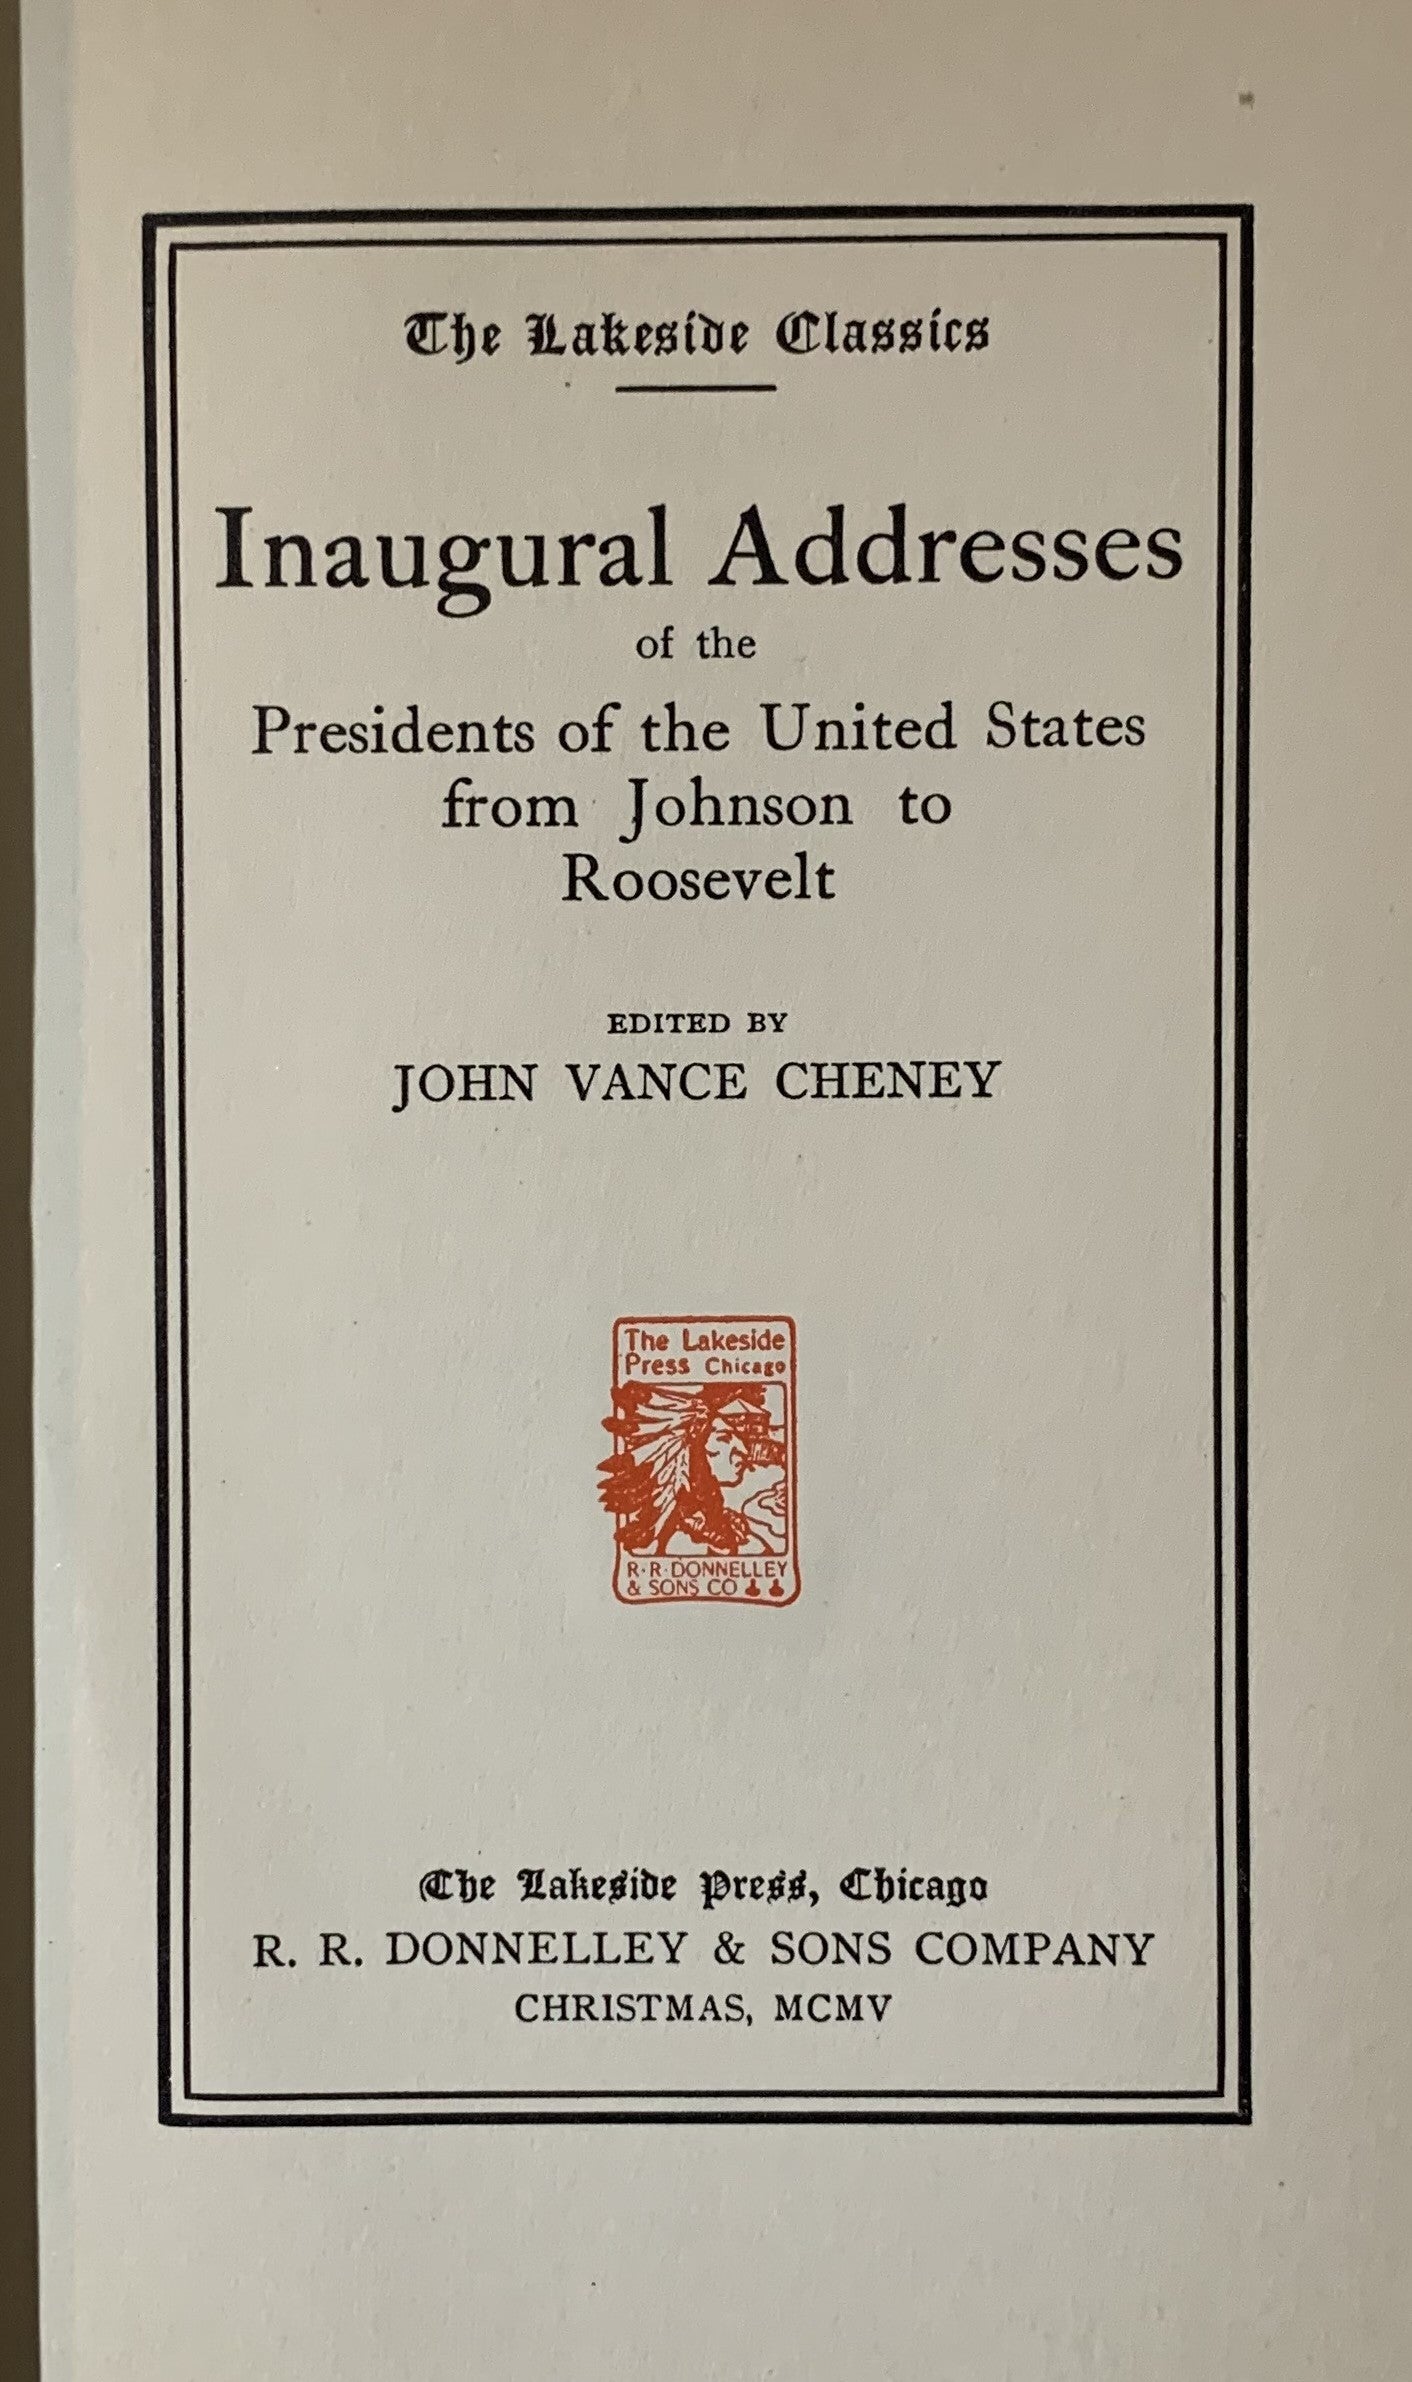 Inaugural Addresses of the Presidents of the United States from Johnson to Roosevelt